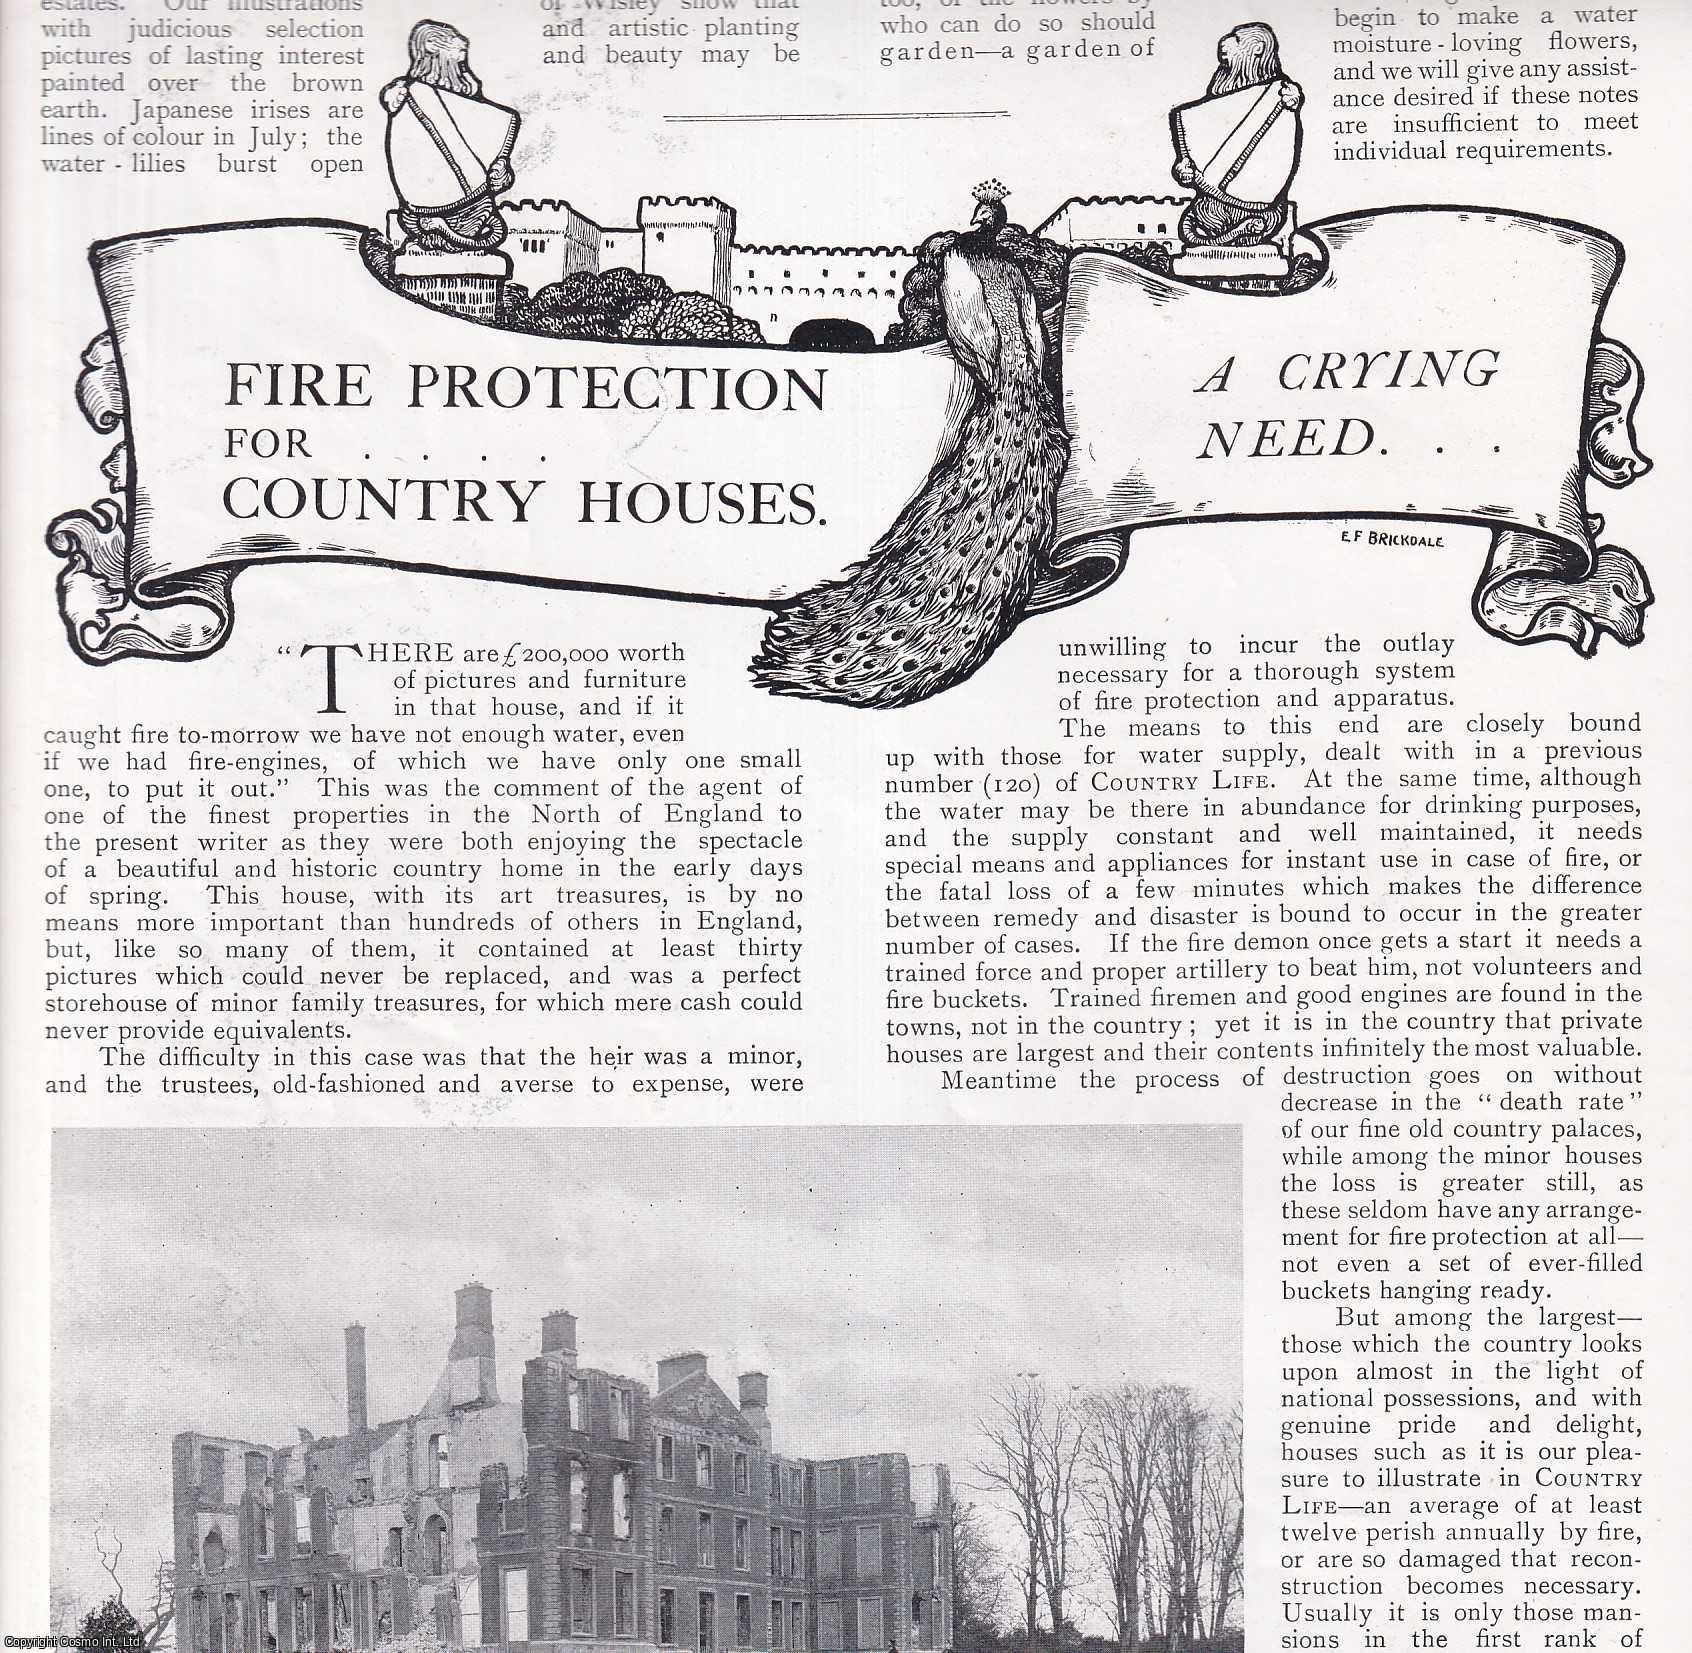 COUNTRY LIFE - Fire Protection for Country Houses; a Crying Need. Several pictures and accompanying text, removed from an original issue of Country Life Magazine, 1899